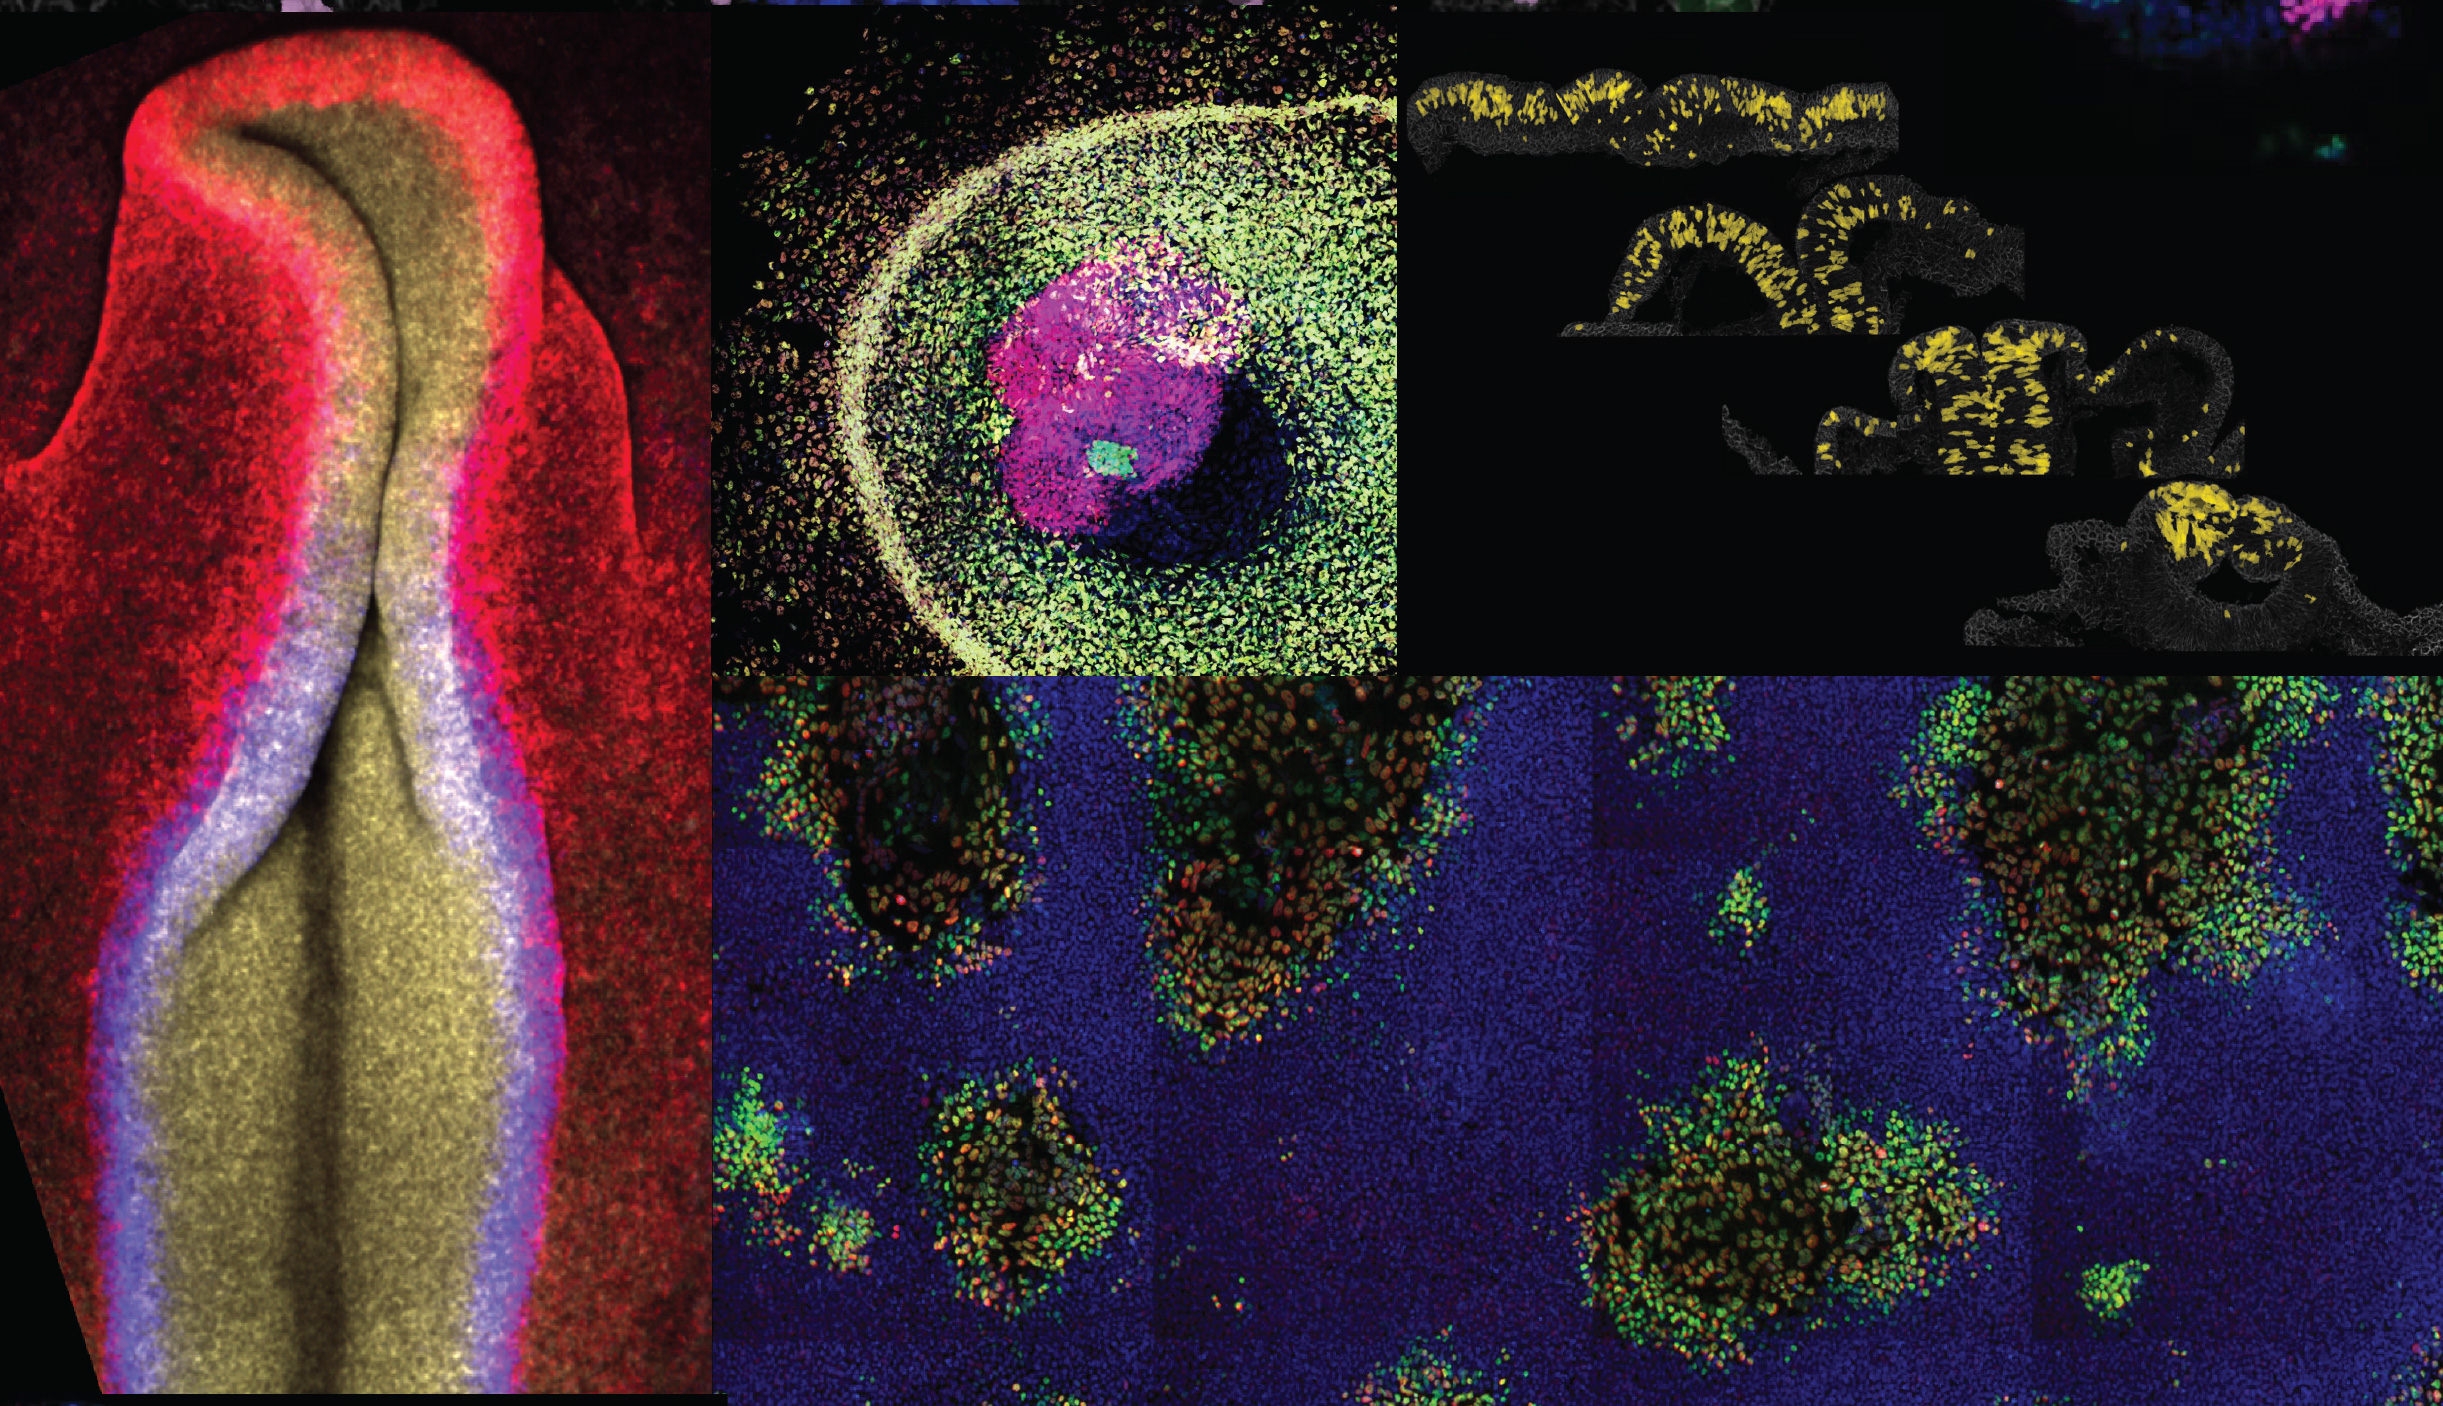 Examples of fluorescent and pseudo-colored images of developing neural crest cells in the embryo and in tissue culture.